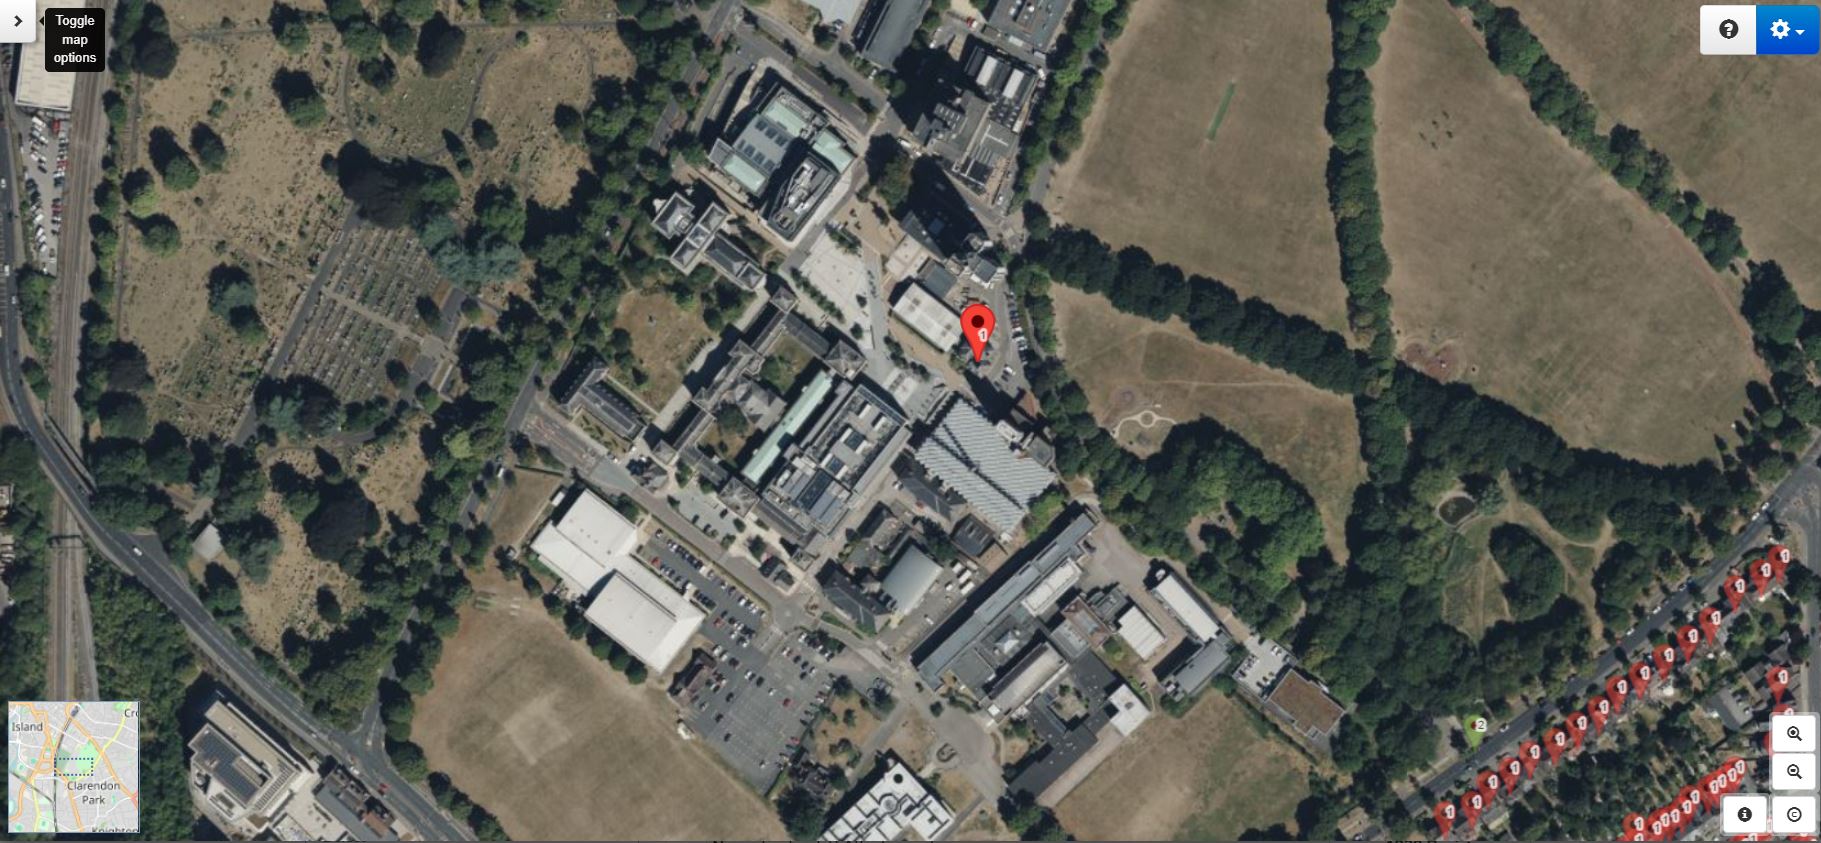 Bing Satellite on Map Explorer™ shows College House on the University of Leicester campus